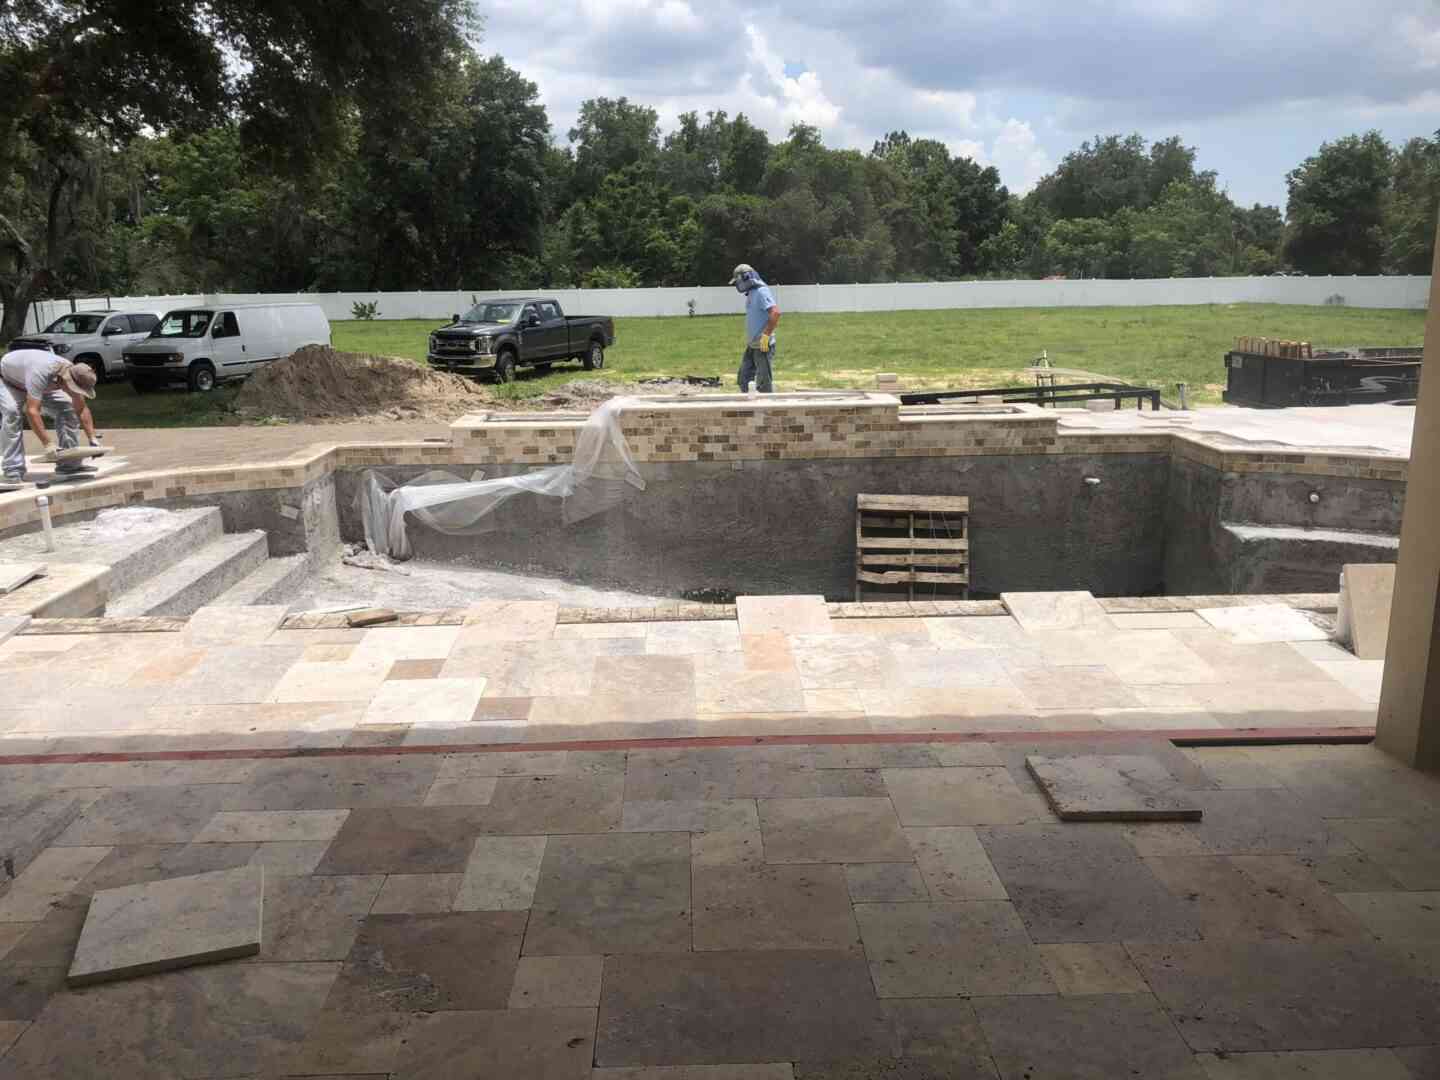 Pool tiles being placed